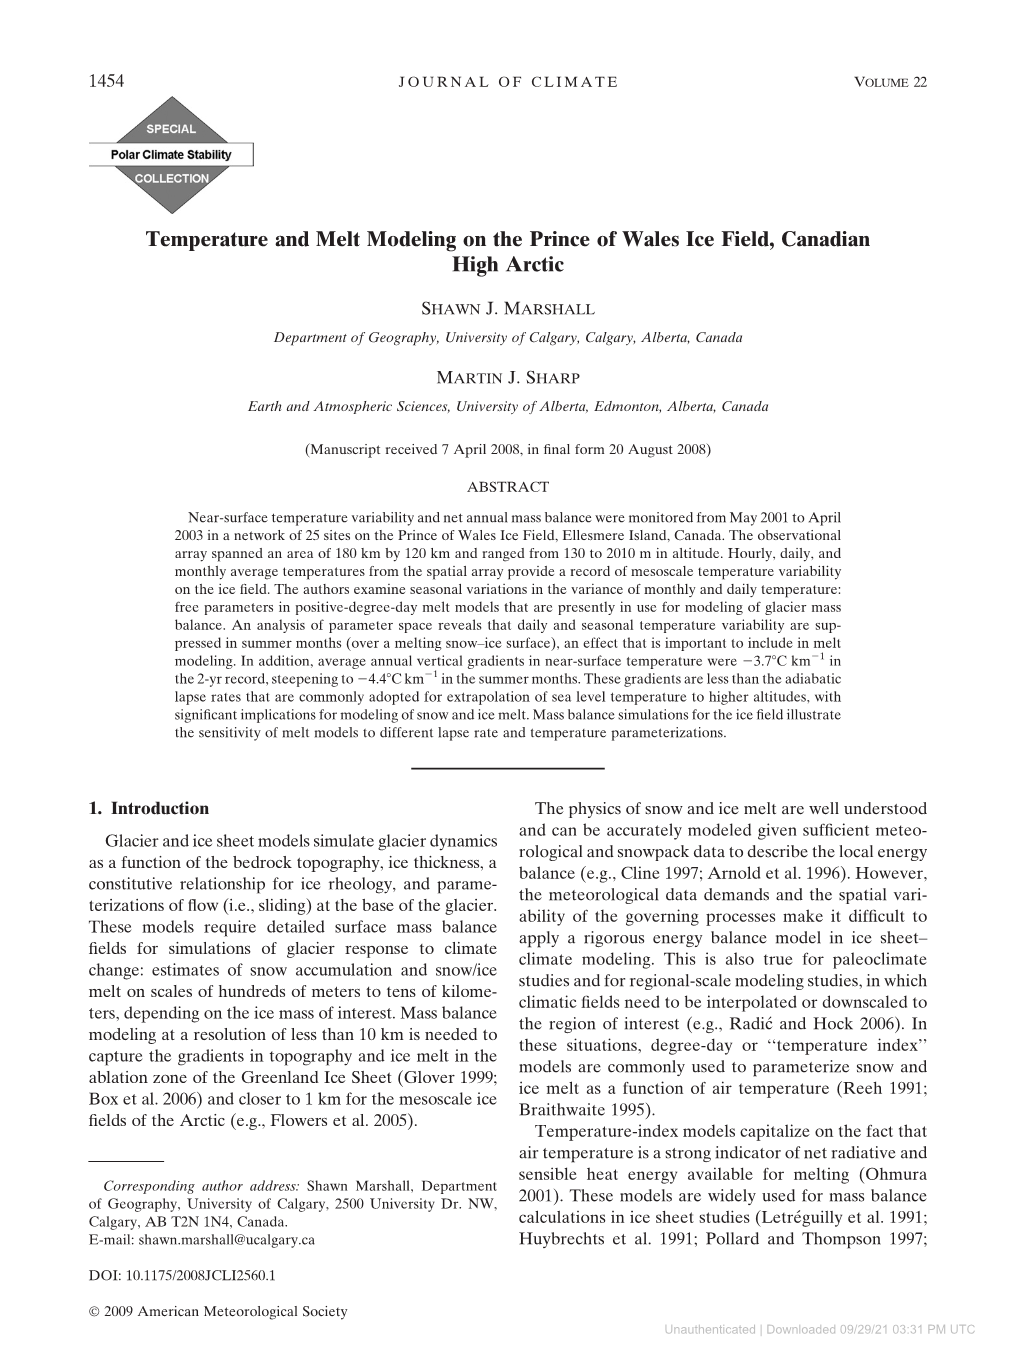 Temperature and Melt Modeling on the Prince of Wales Ice Field, Canadian High Arctic